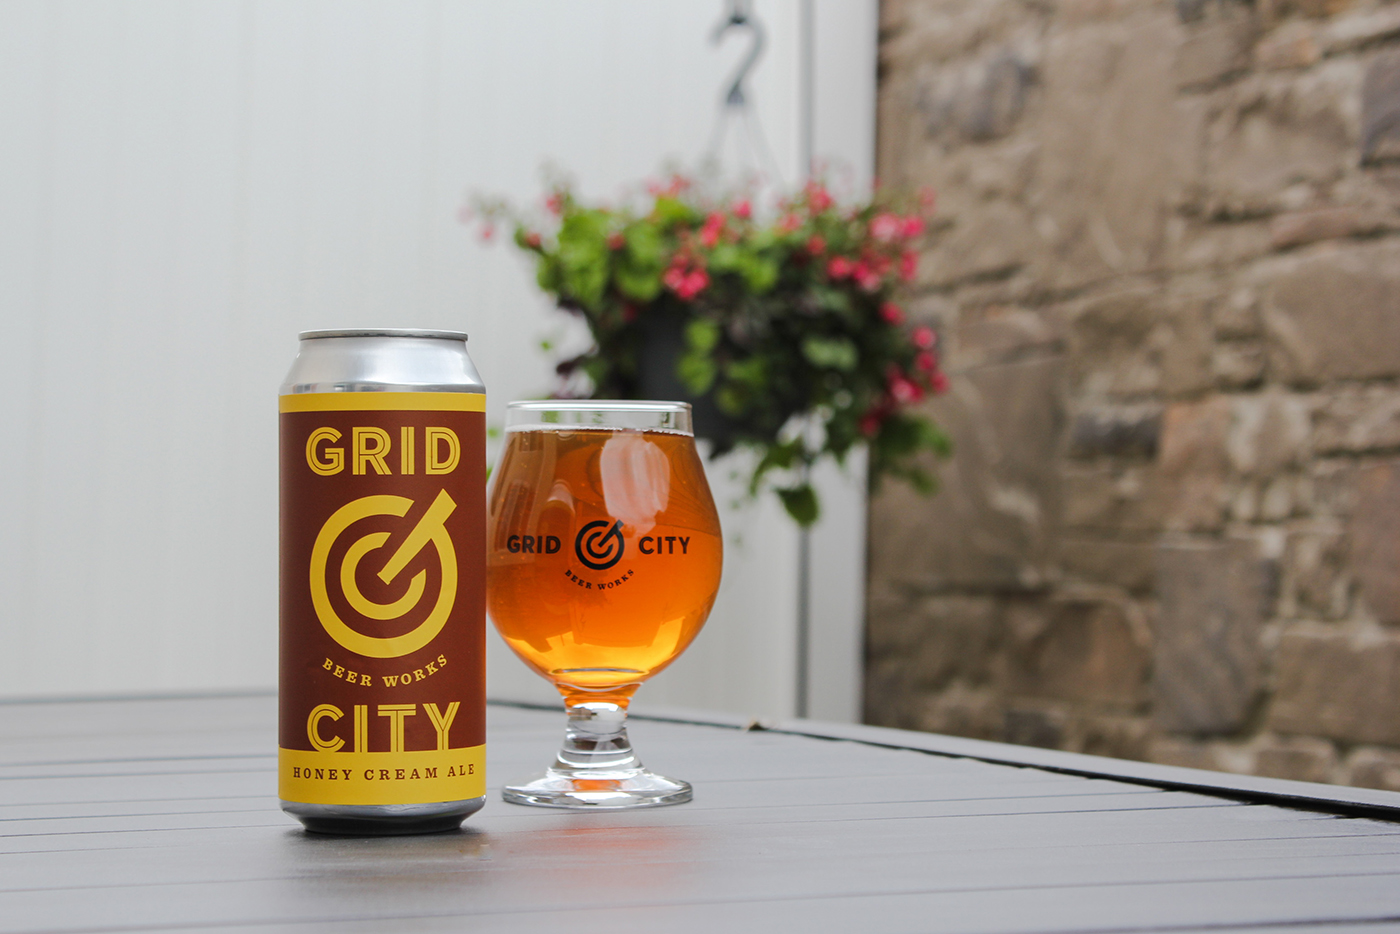 Grid City Beer Works' Honey Cream Ale is an amber-hued, liquefied treat with aromas of citrus, flora, wheat and a solid smell of gourmet, farmers’-market honey sticks.